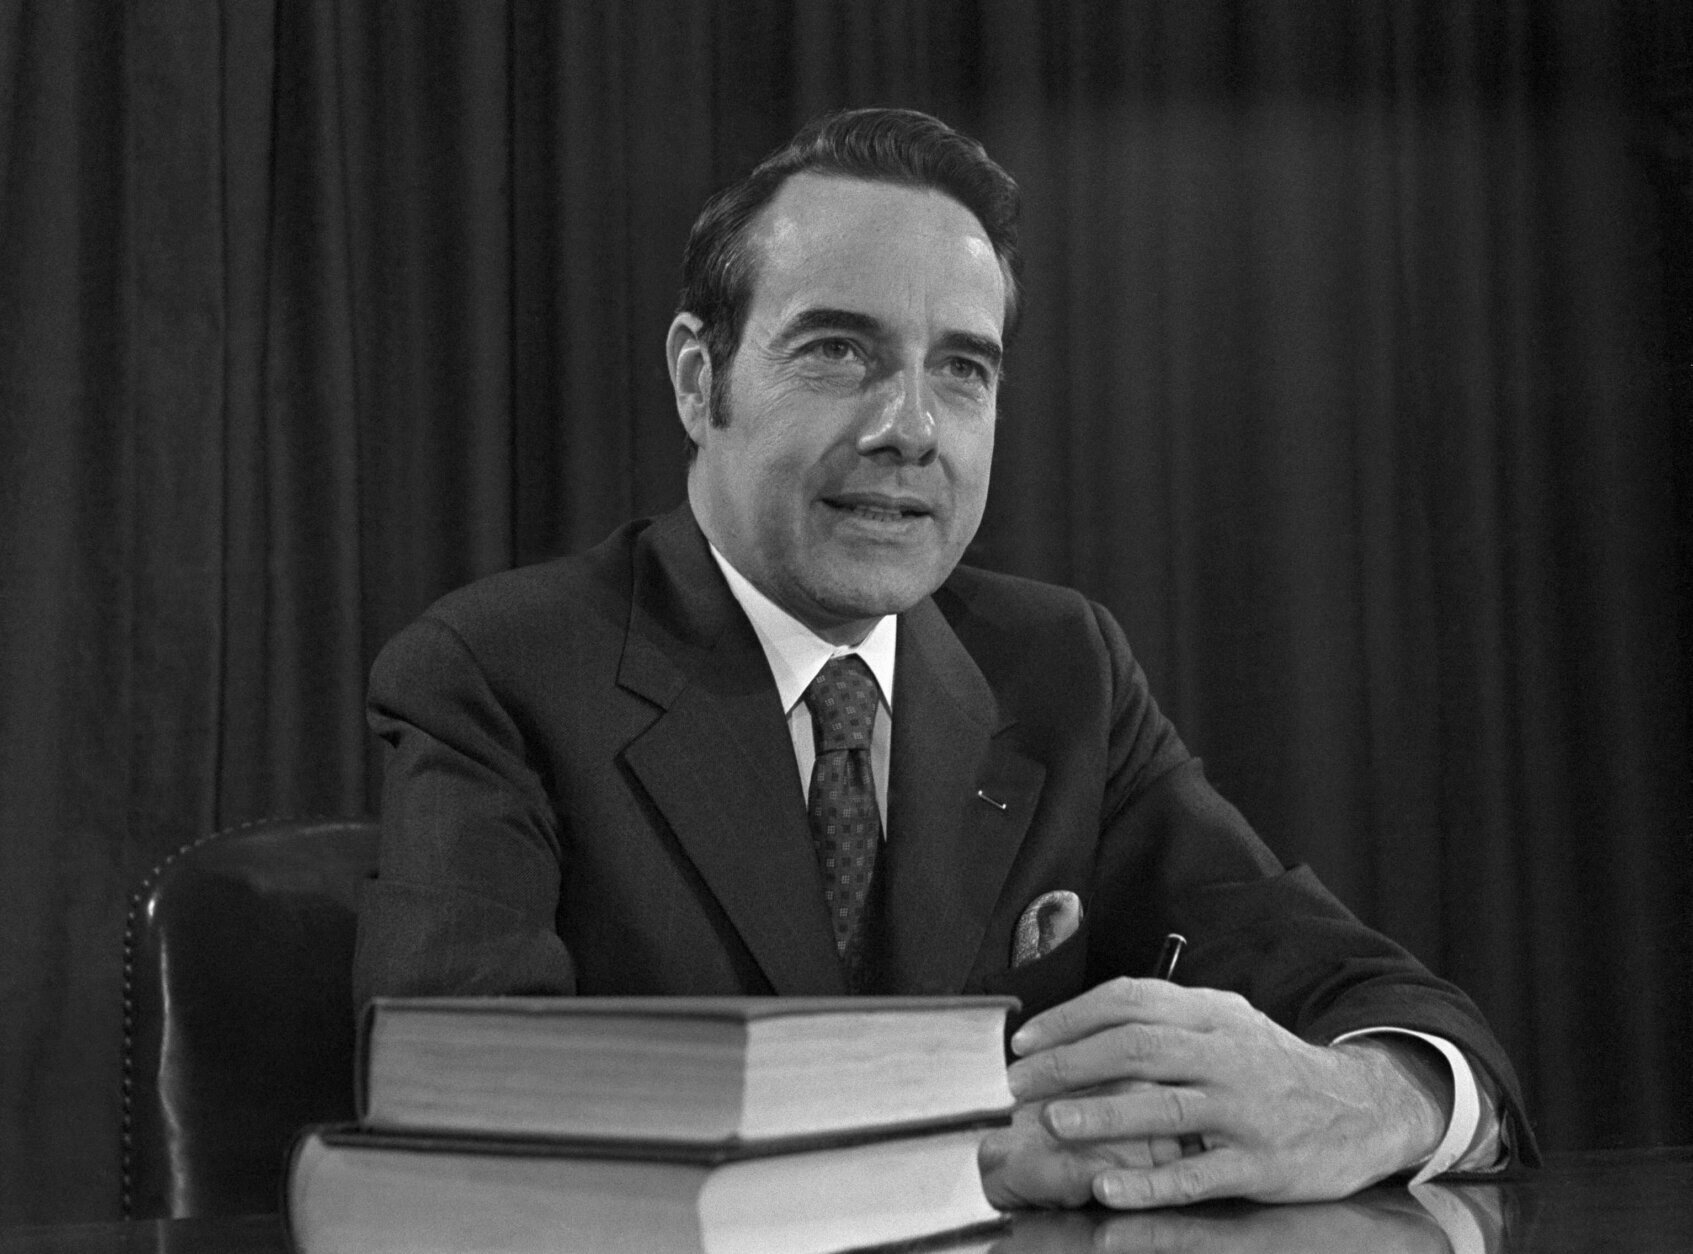 Sen. Robert Dole of Kansas confirms he is Pres. Richard Nixons choice to take over the chairmanship of the Republican National Committee, Jan. 6, 1971, Washington, D.C. Dole says his primary job as chairman will be to re-elect Pres. Nixon. (AP Photo/Henry Griffin)